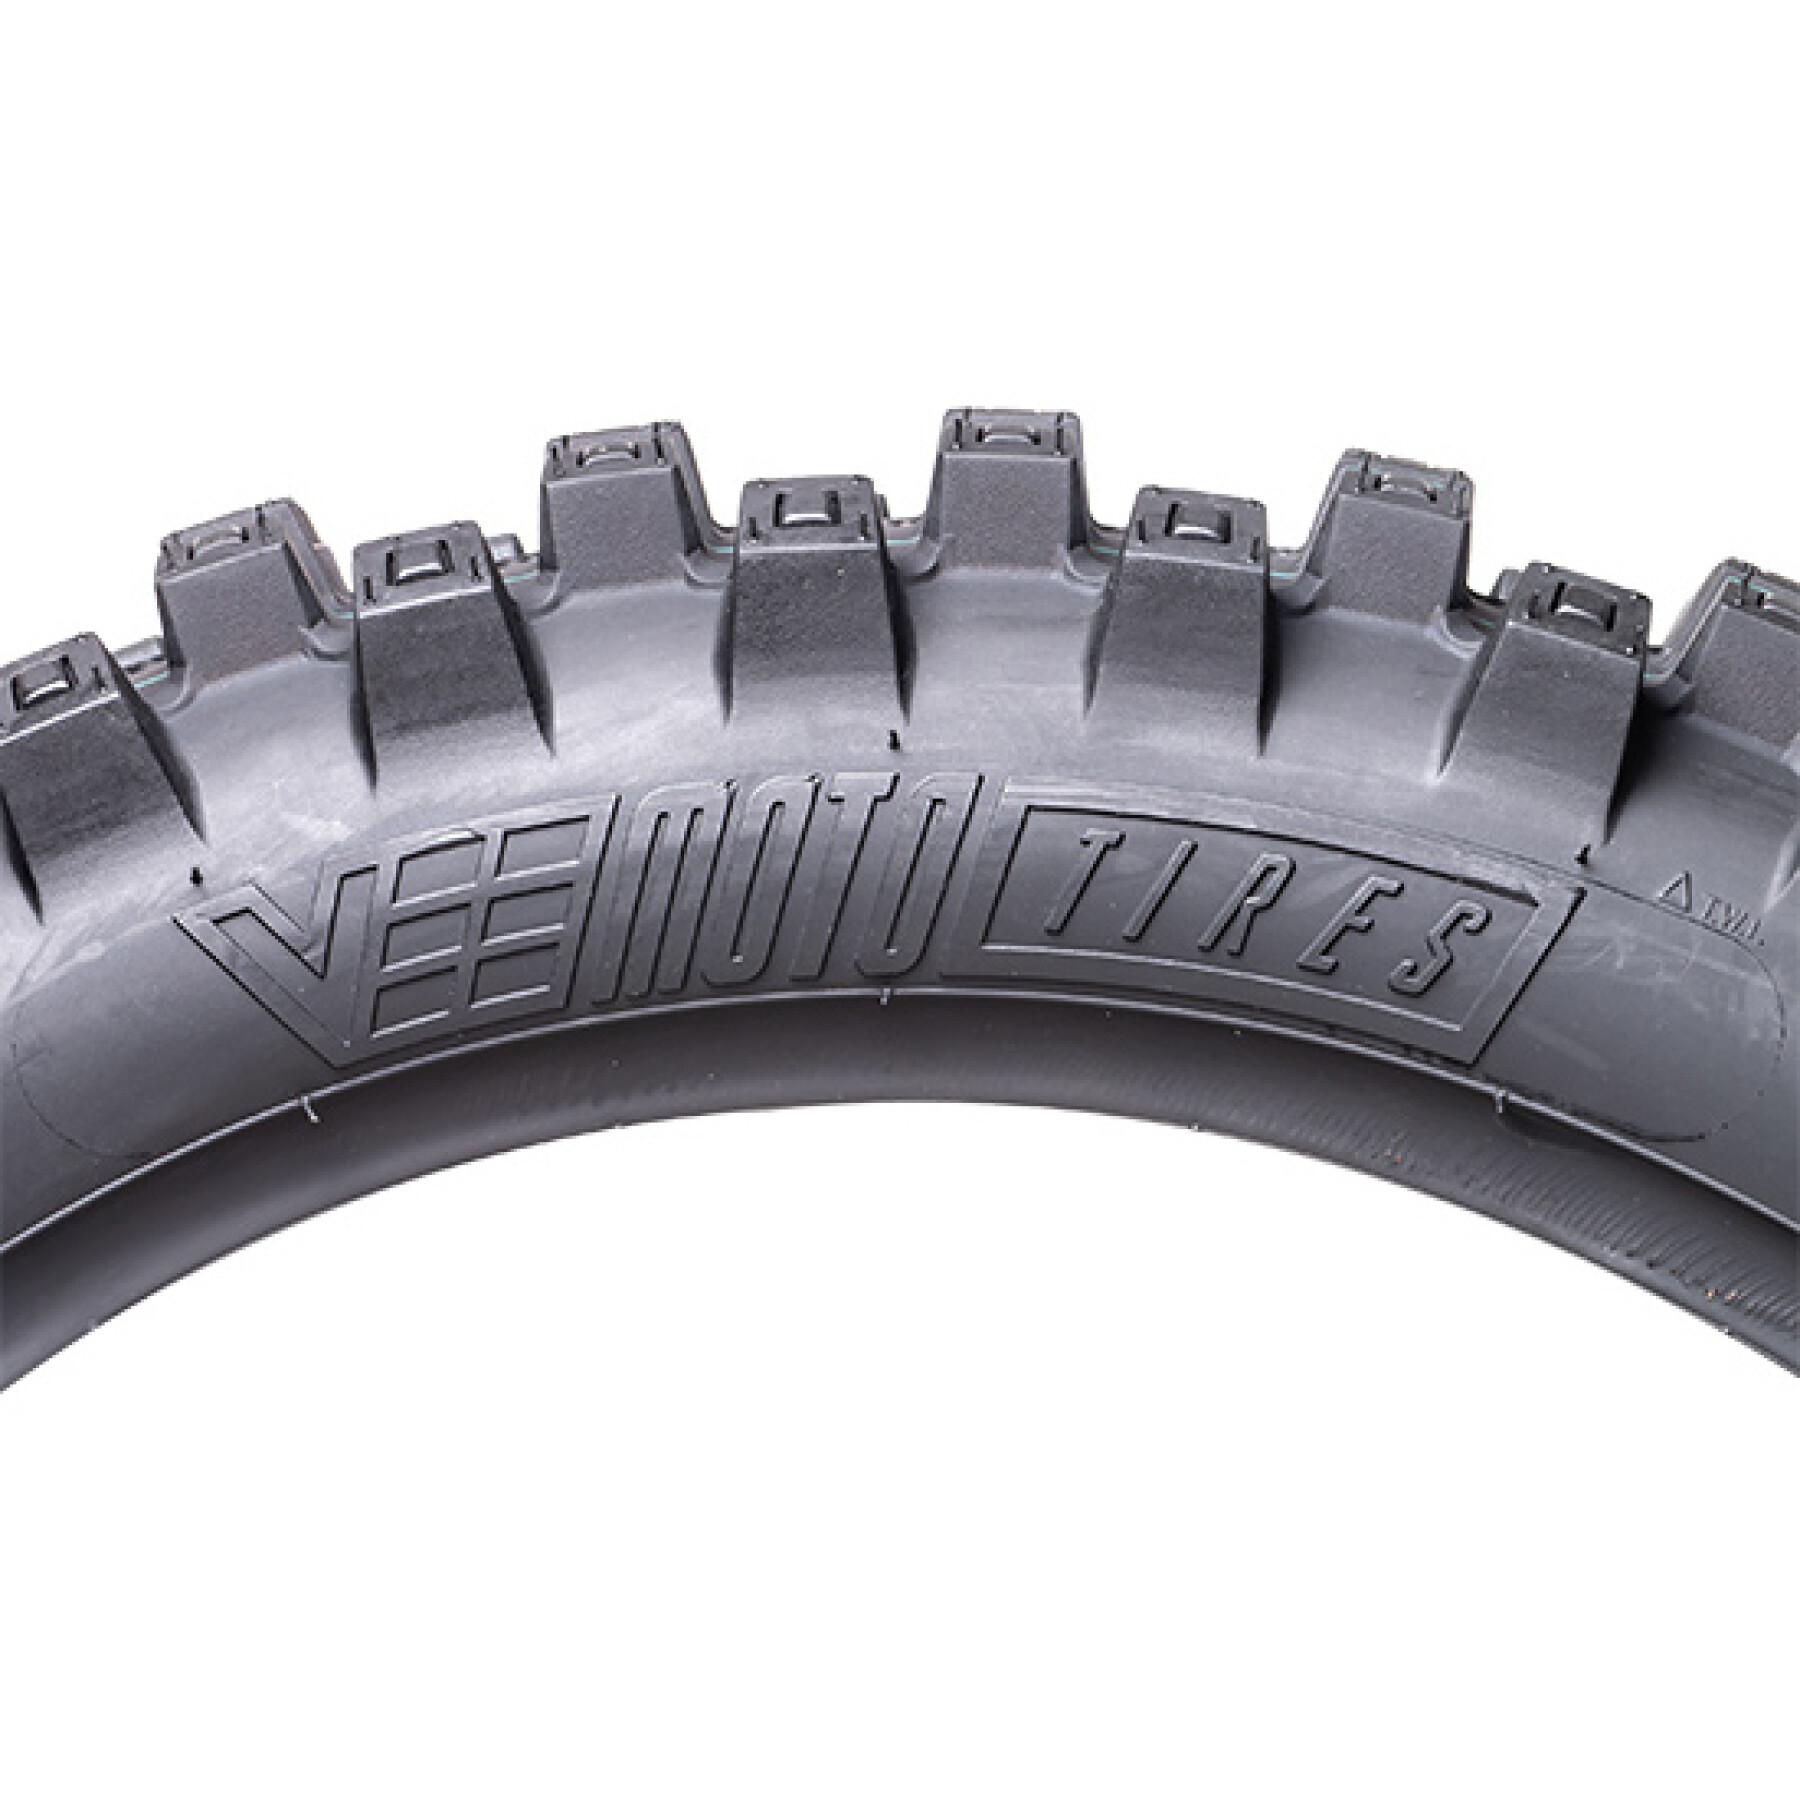 Band Vee Rubber 120/100-18 68M VRM463 TT (5) Force at